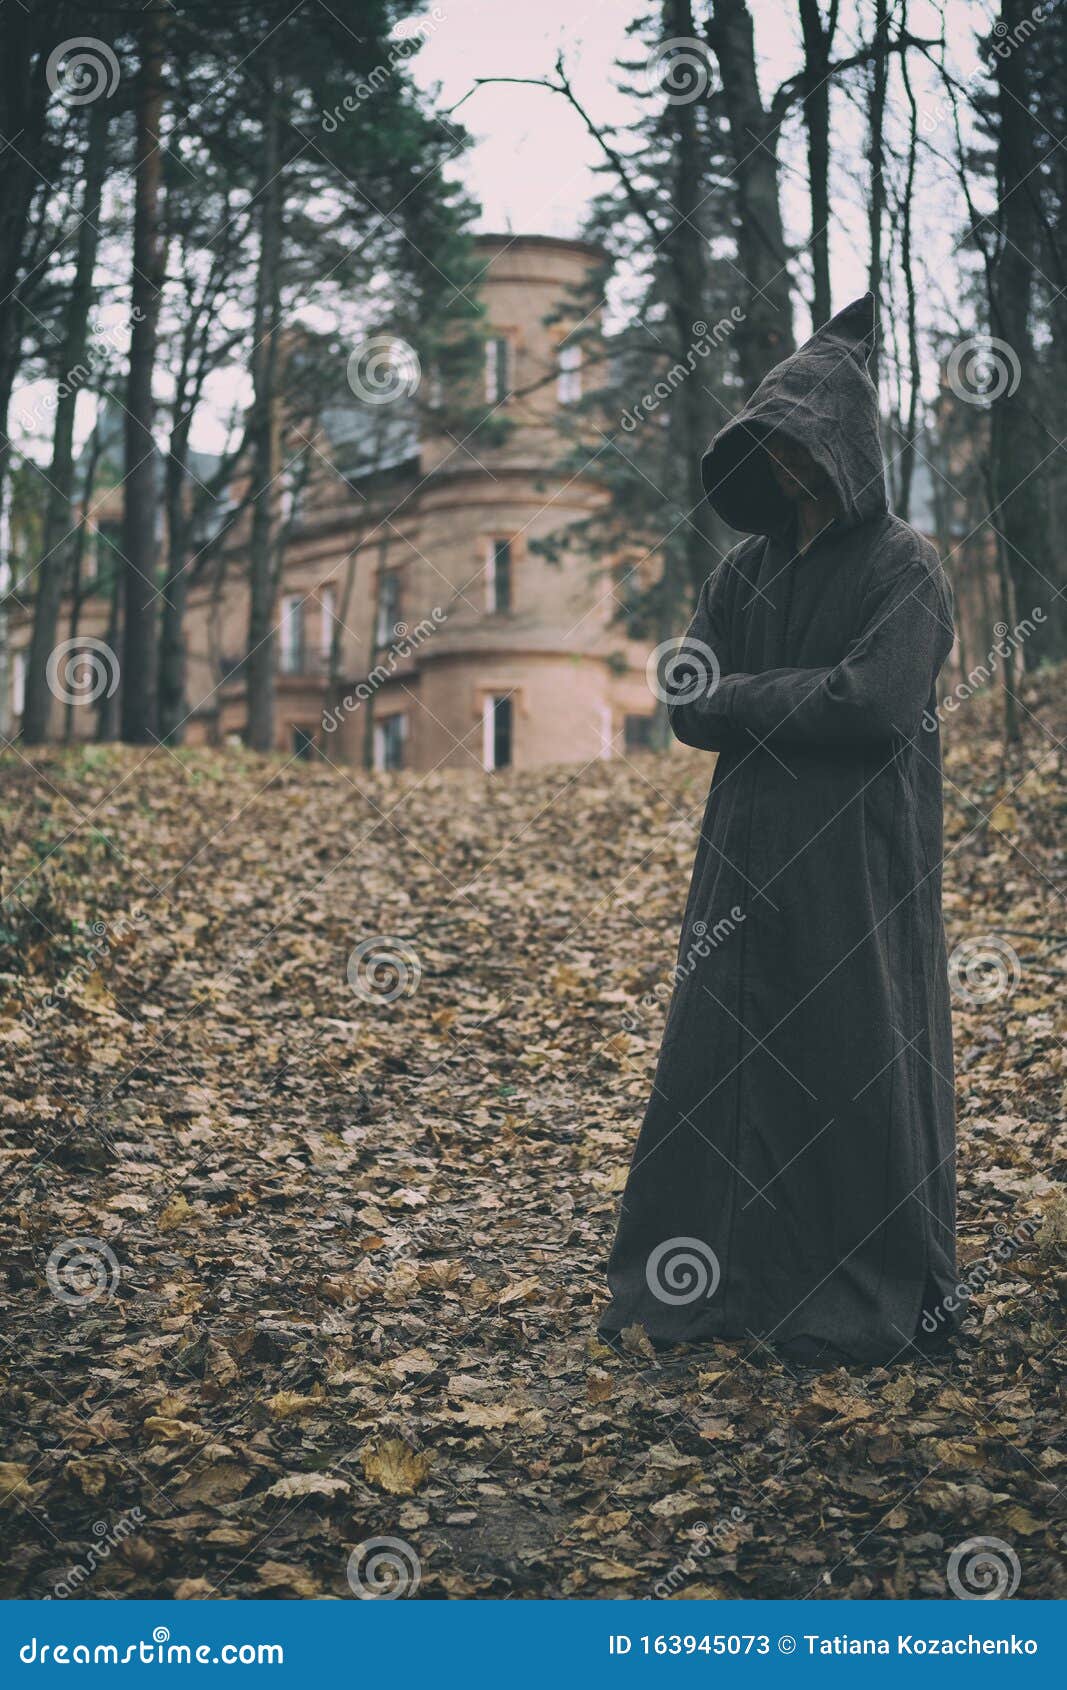 mysterious monk, wizard or adept of secret society in hooded robe stands in forest against the background of medieval castle or